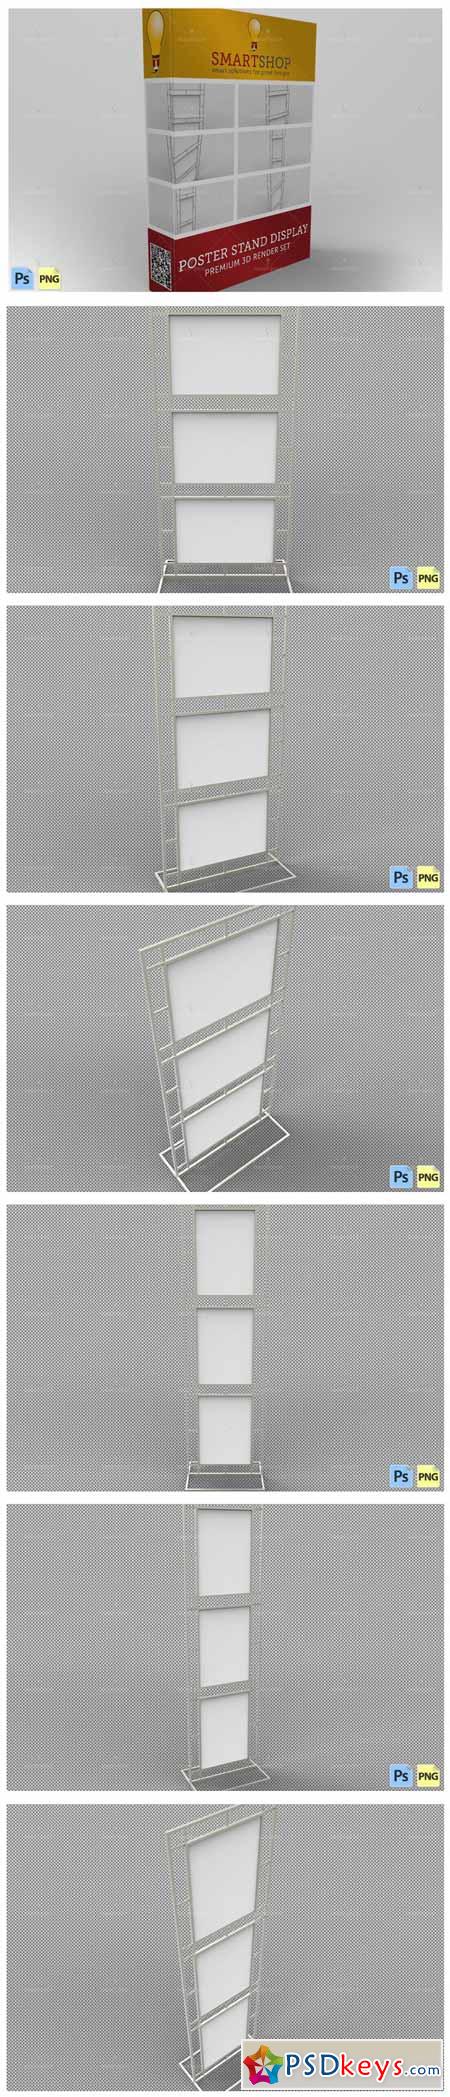 Poster Stand Display 3D Render 583171